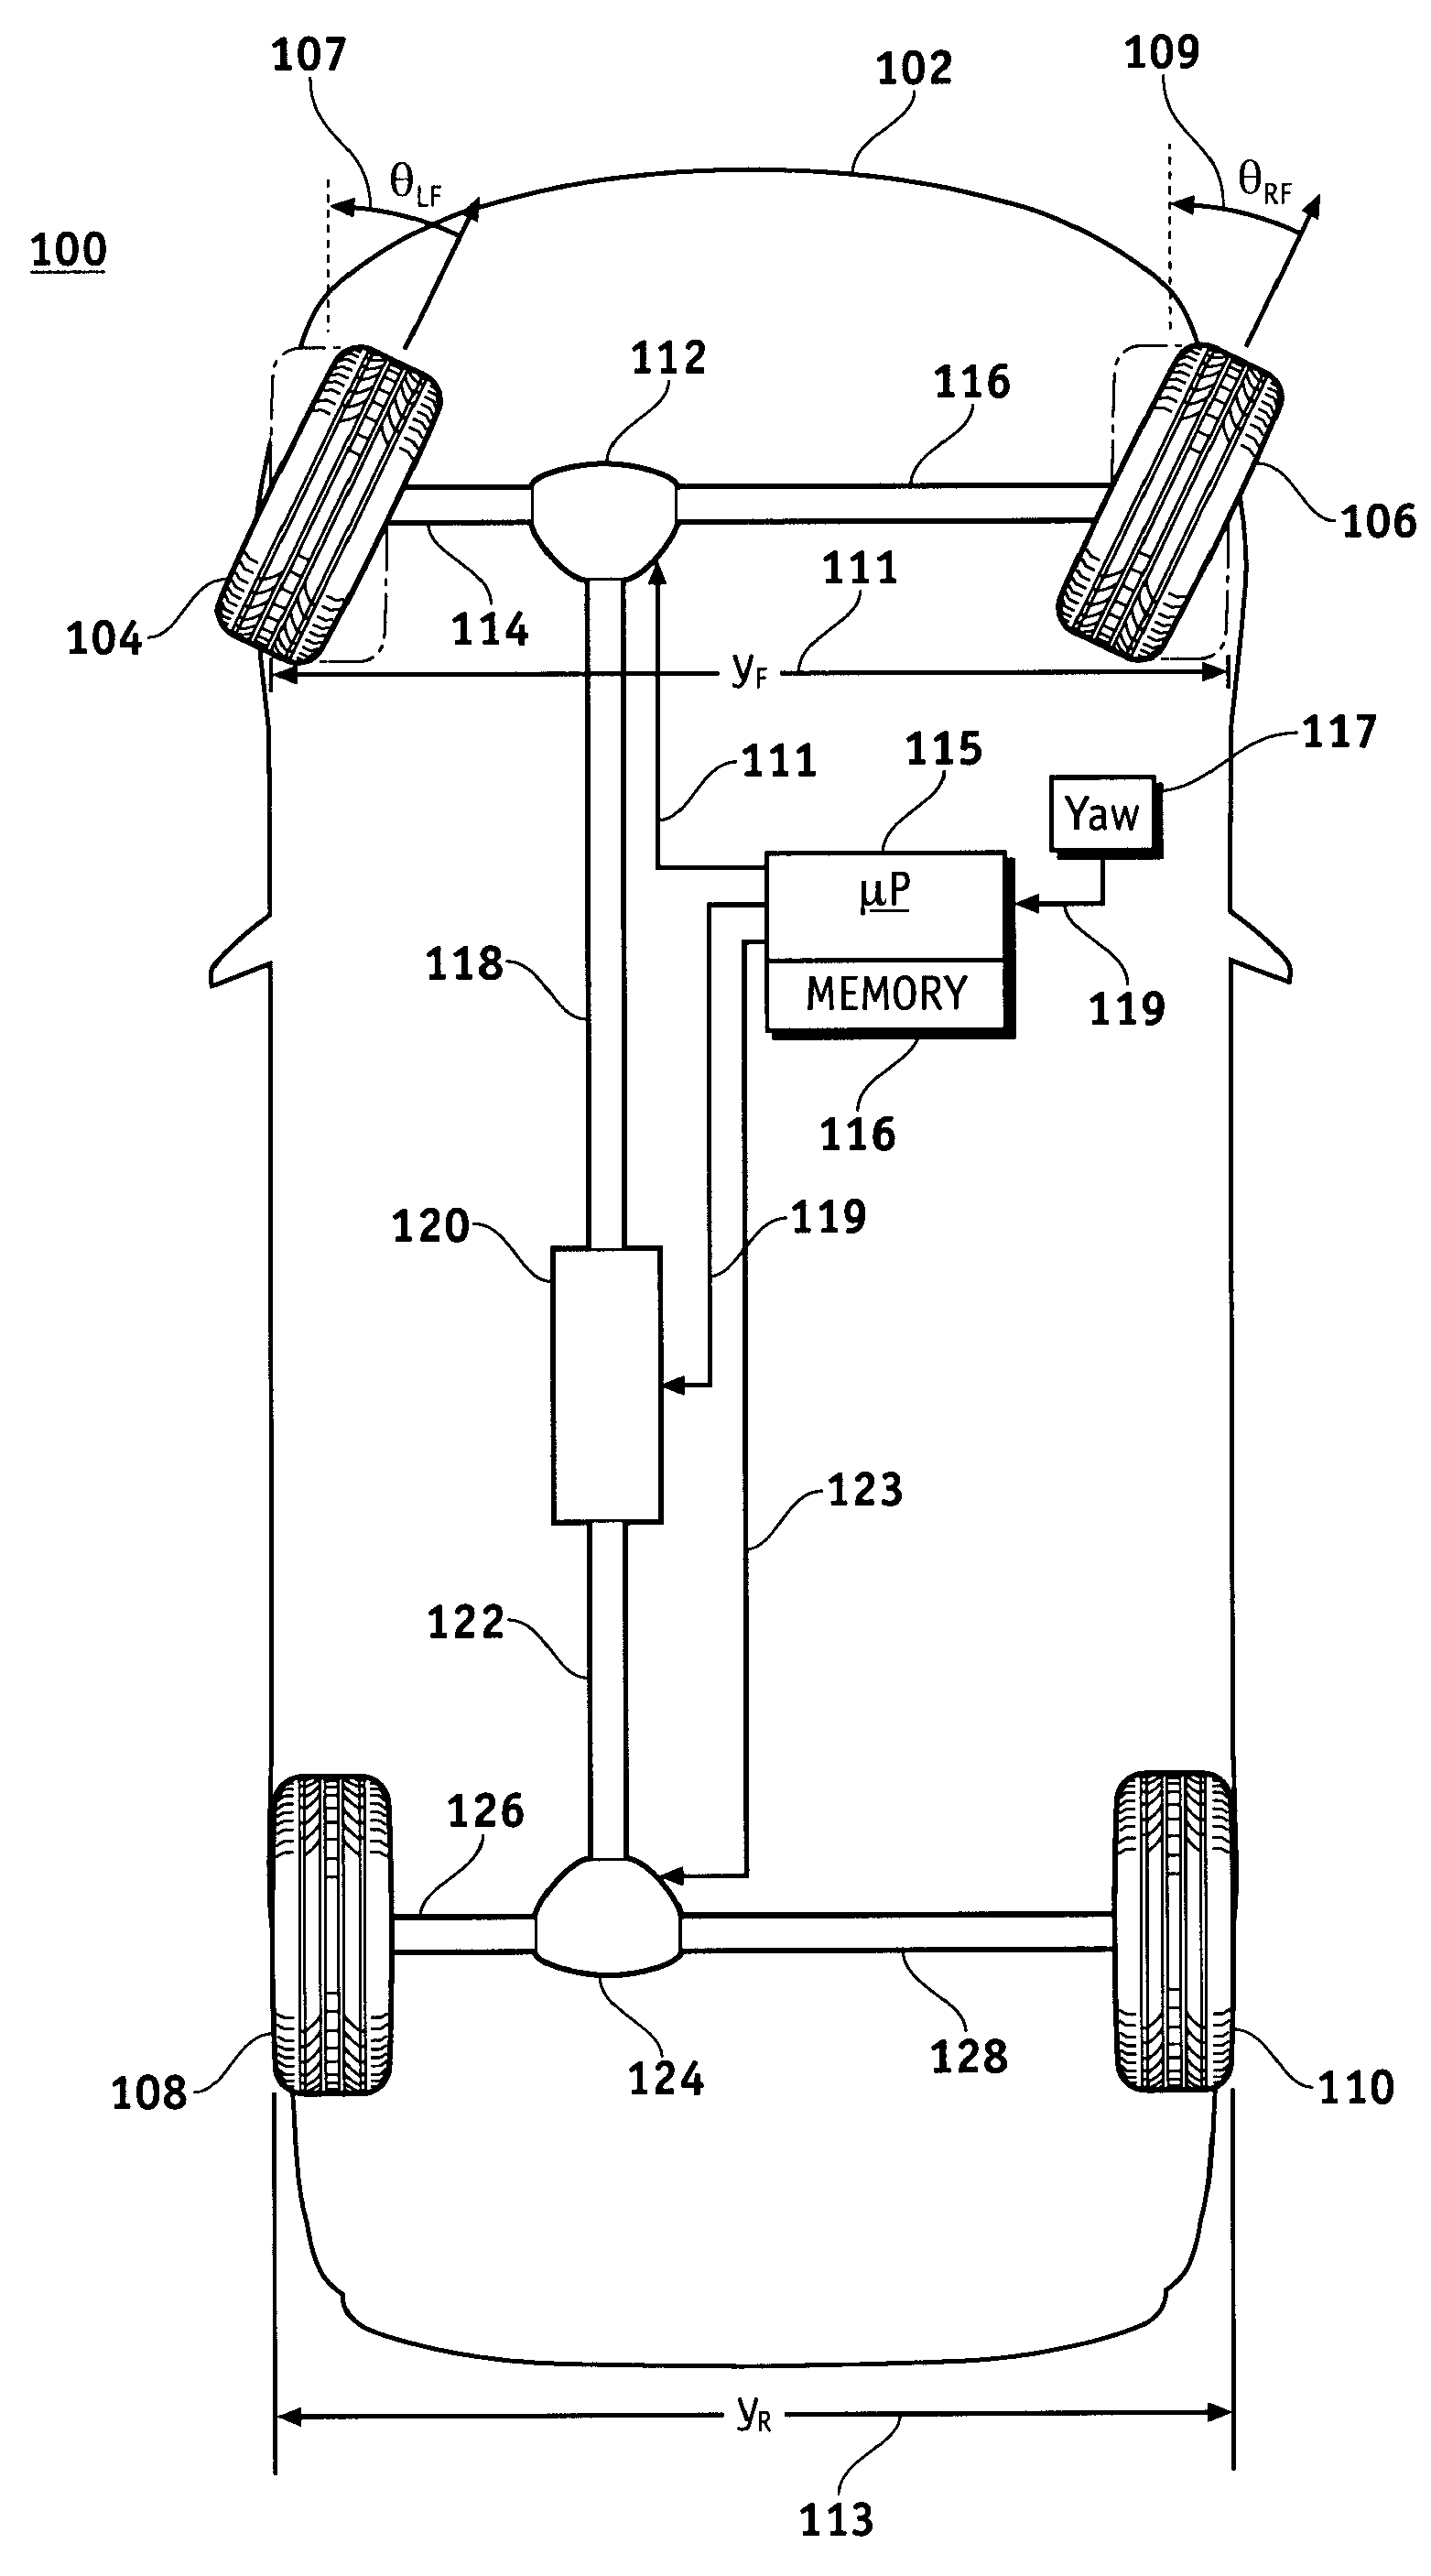 Method and apparatus for generating a cornering-corrected eLSD control signal